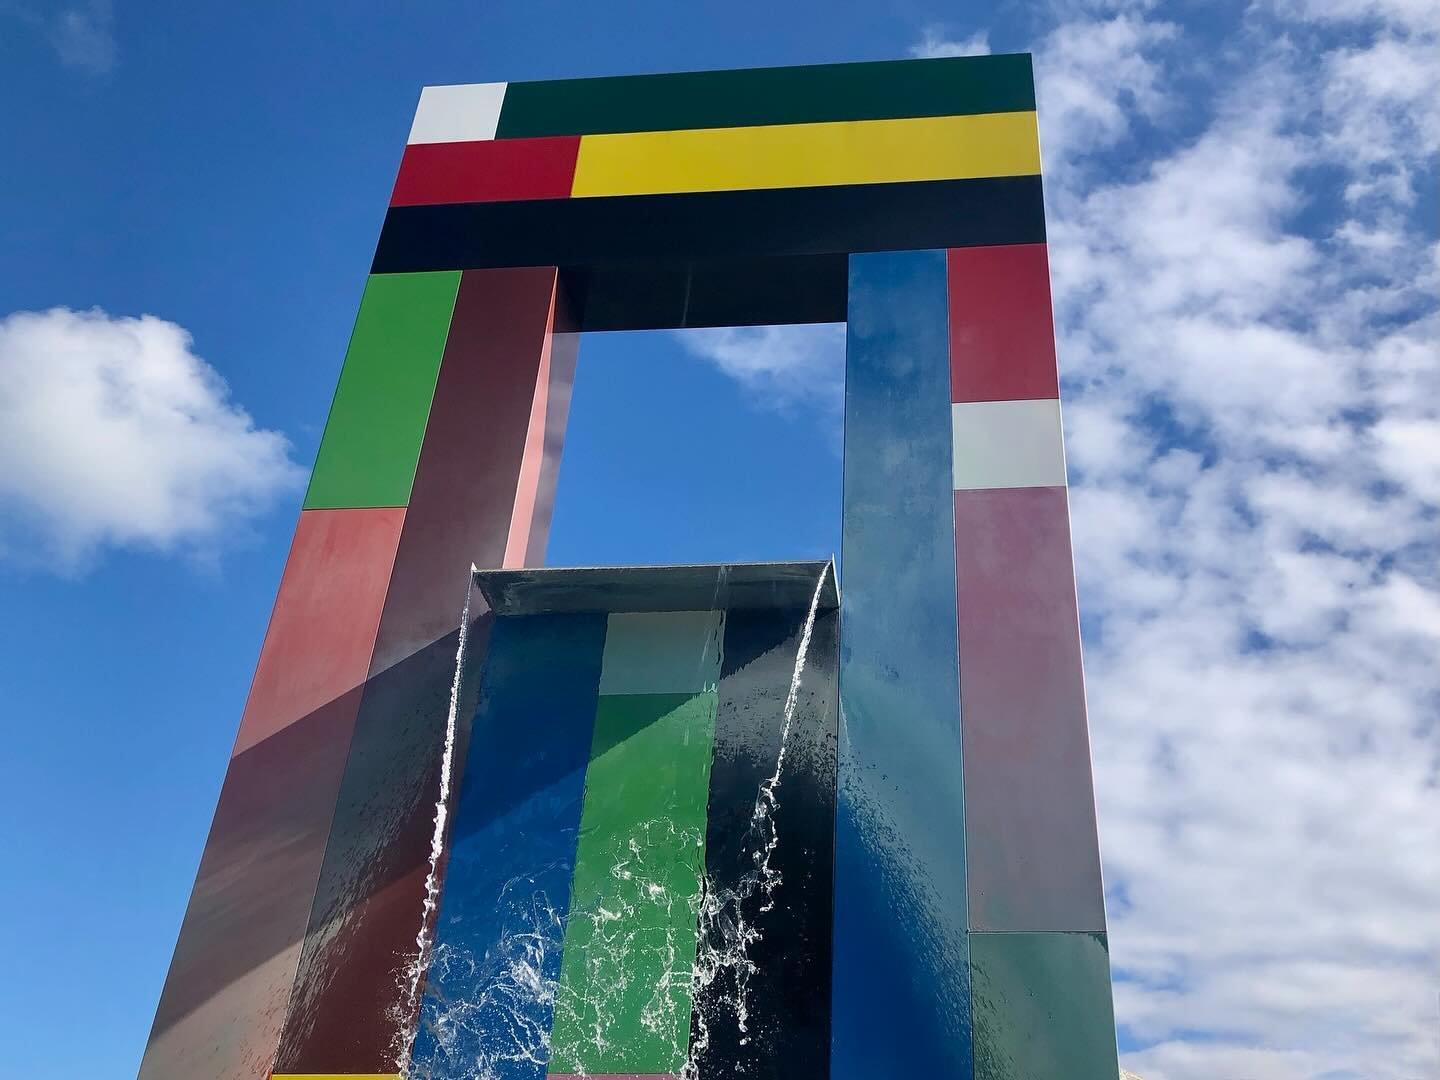 A POSTCARD FROM KIRIKIRIROA HAMILTON | A striking sculpture, with canine connections, on a sunny autumnal afternoon, at Kirikiriroa Hamilton.  Read more on Substack #thefoodpathnz #substack